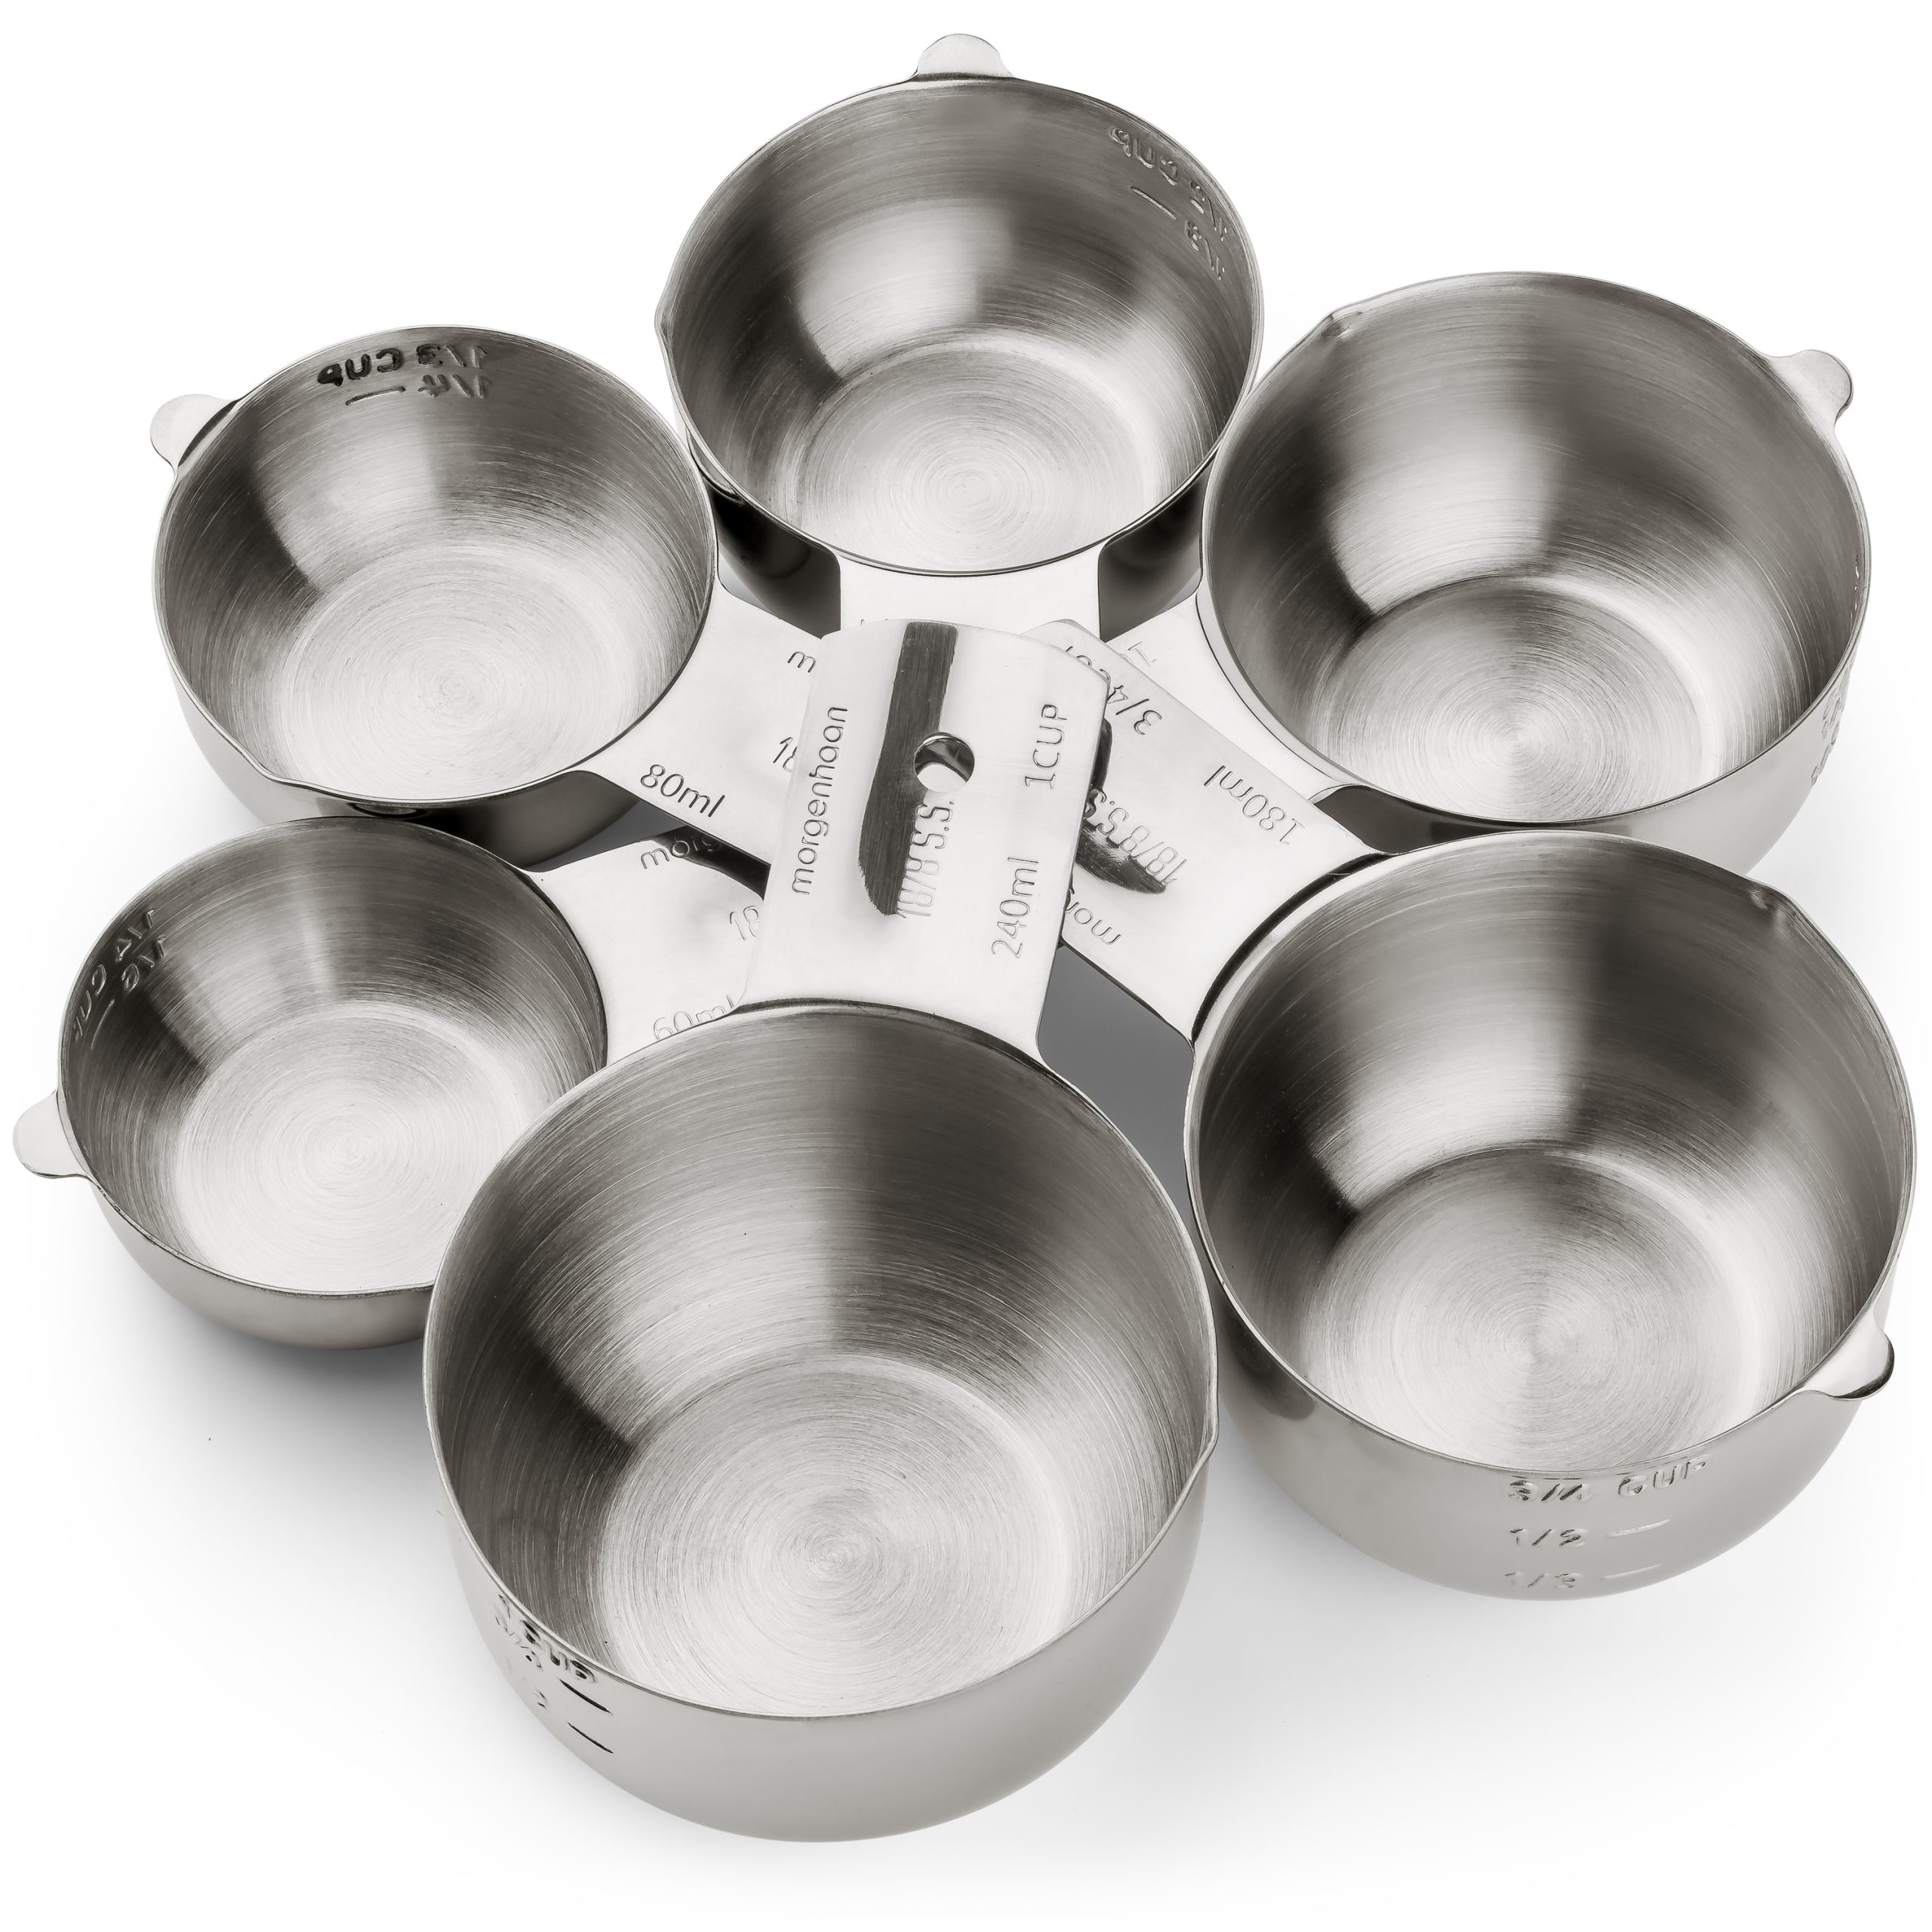 Morgenhaan Stainless Steel Measuring Cups and Spoons, Set of 13 Pieces: Durable, Elegant